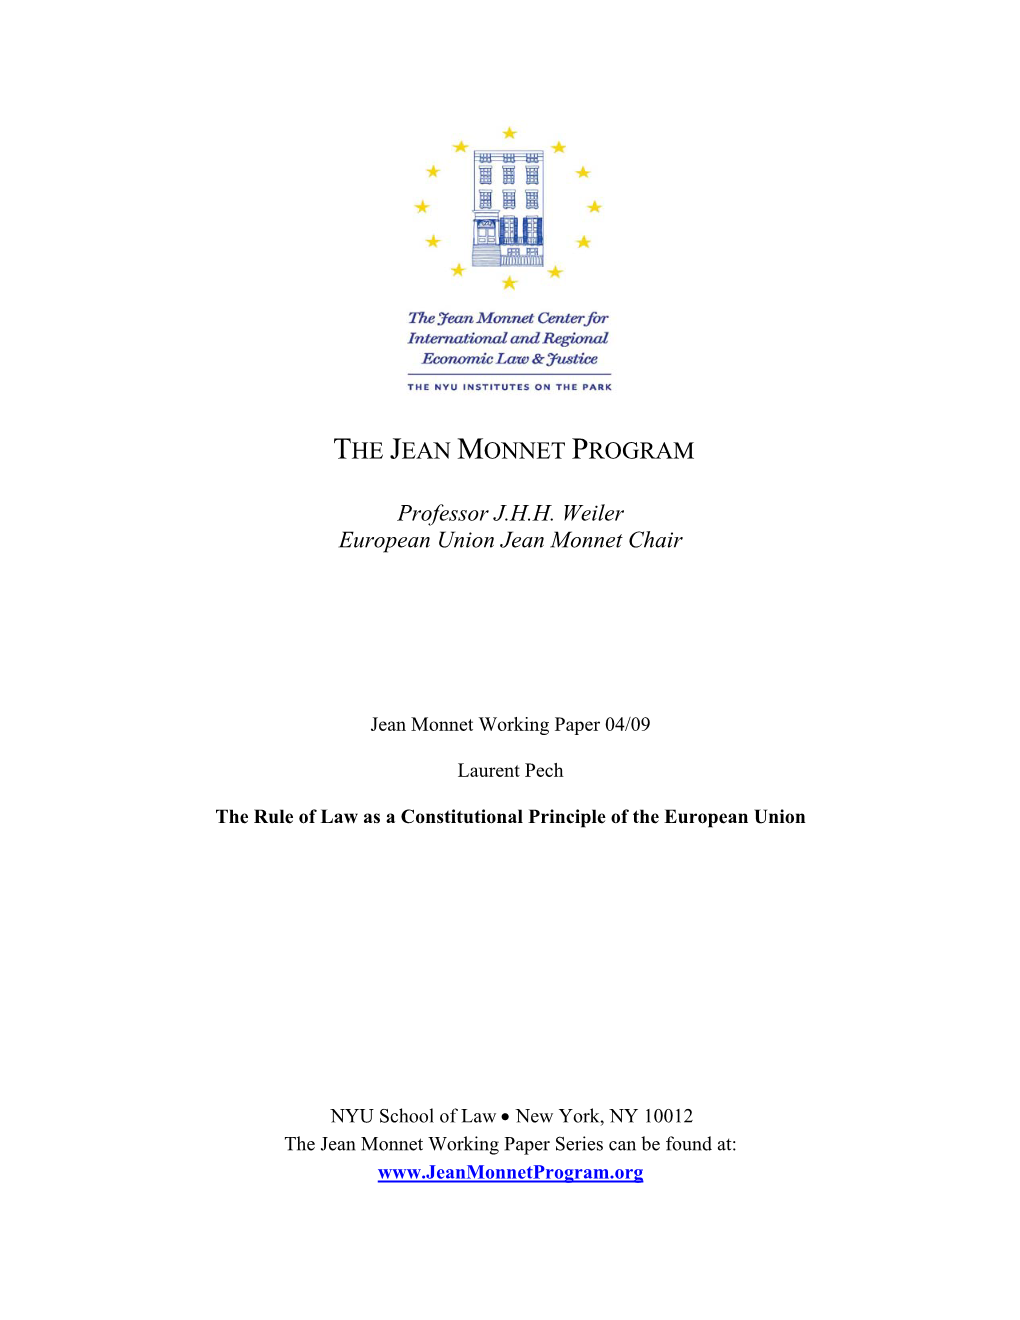 The Rule of Law As a Constitutional Principle of the European Union